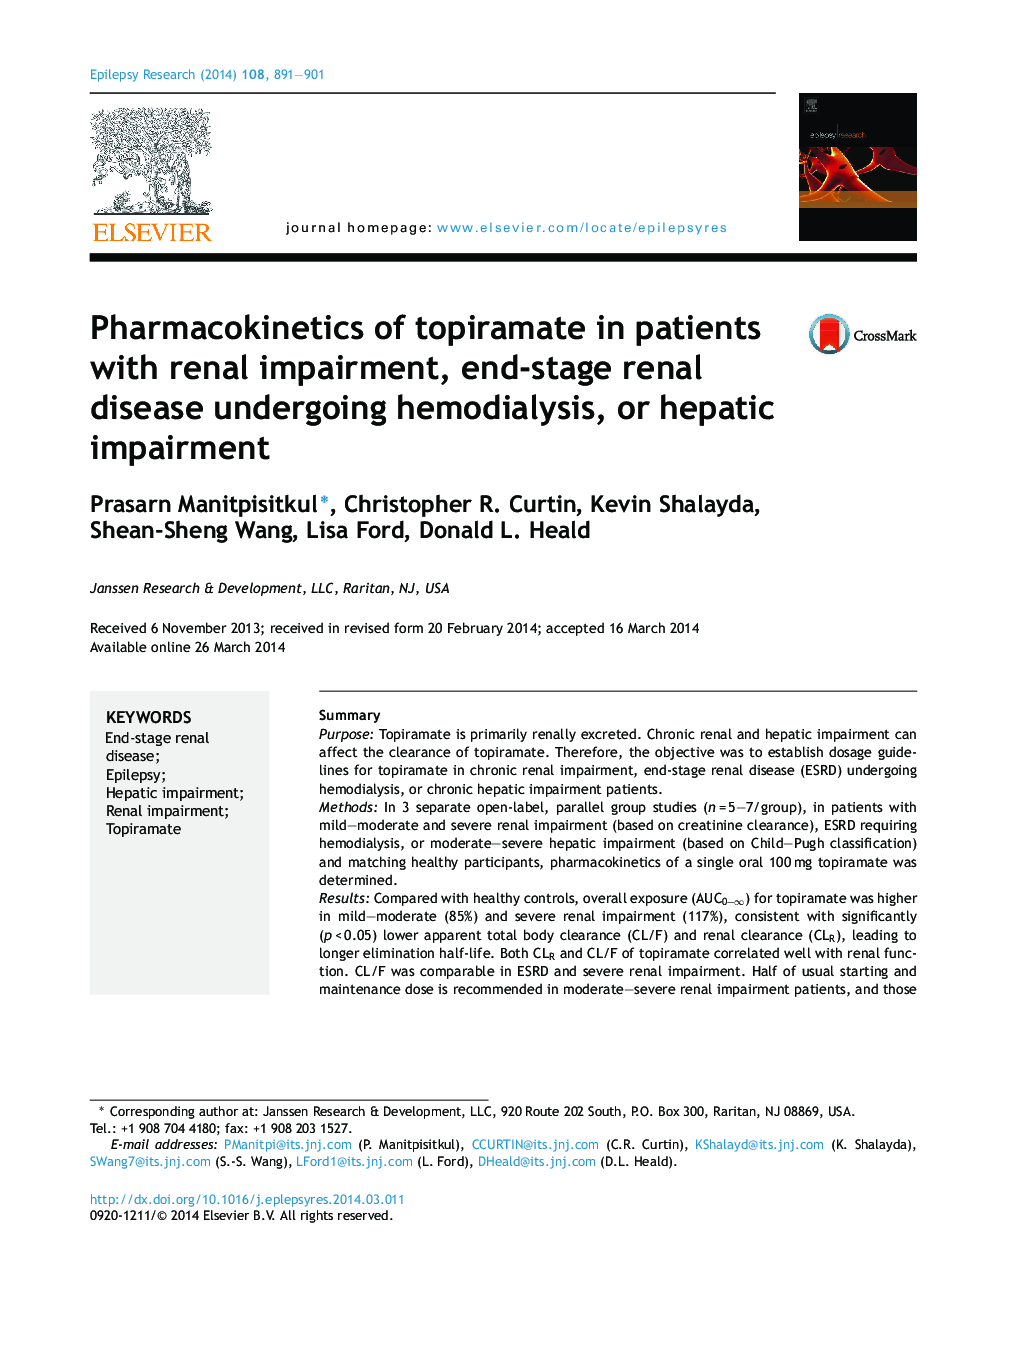 Pharmacokinetics of topiramate in patients with renal impairment, end-stage renal disease undergoing hemodialysis, or hepatic impairment